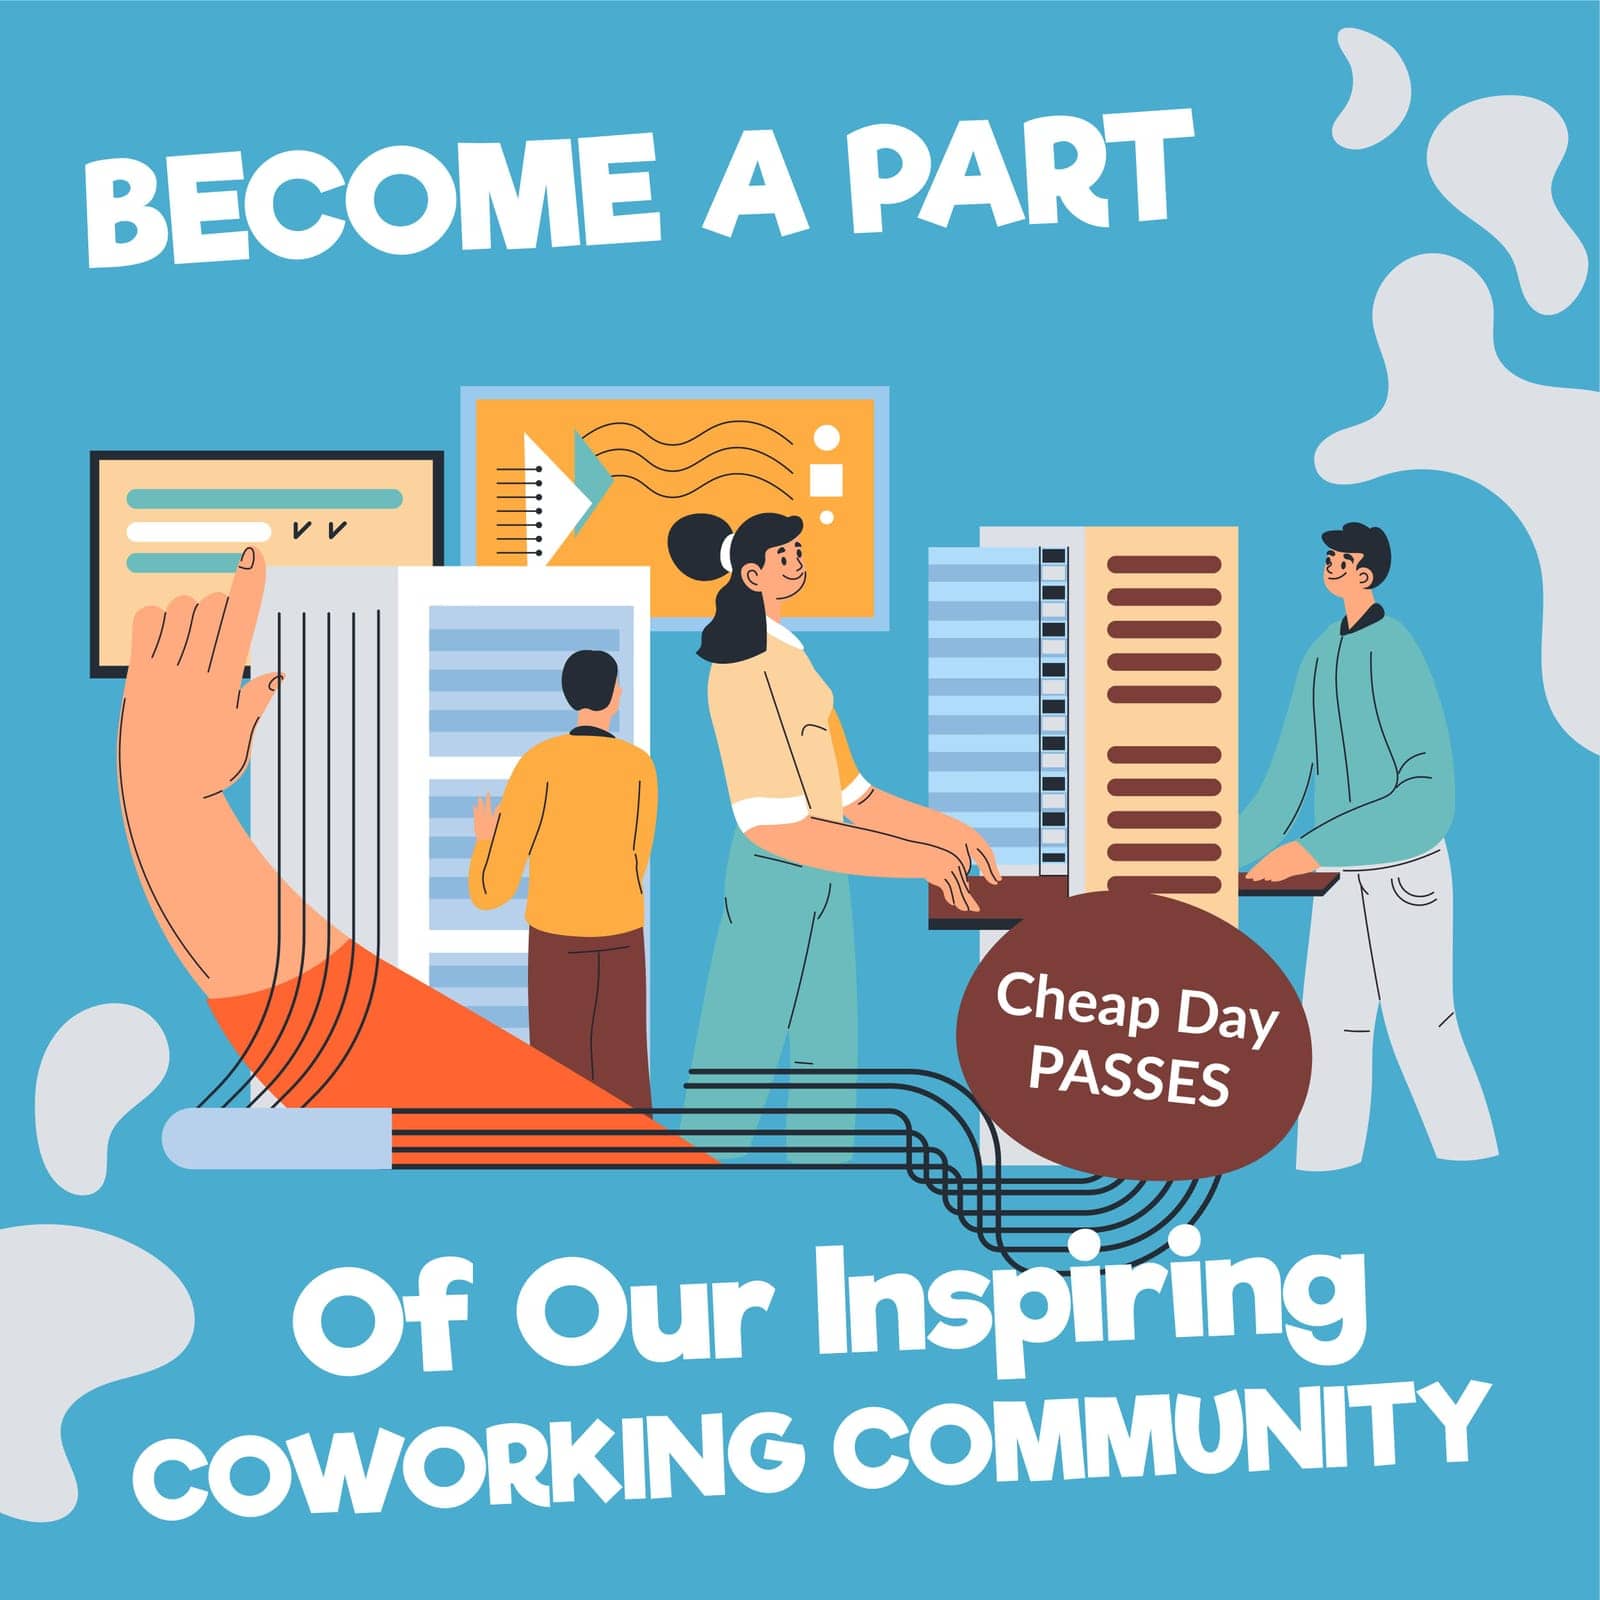 Become a part of our inspiring coworking community by Sonulkaster